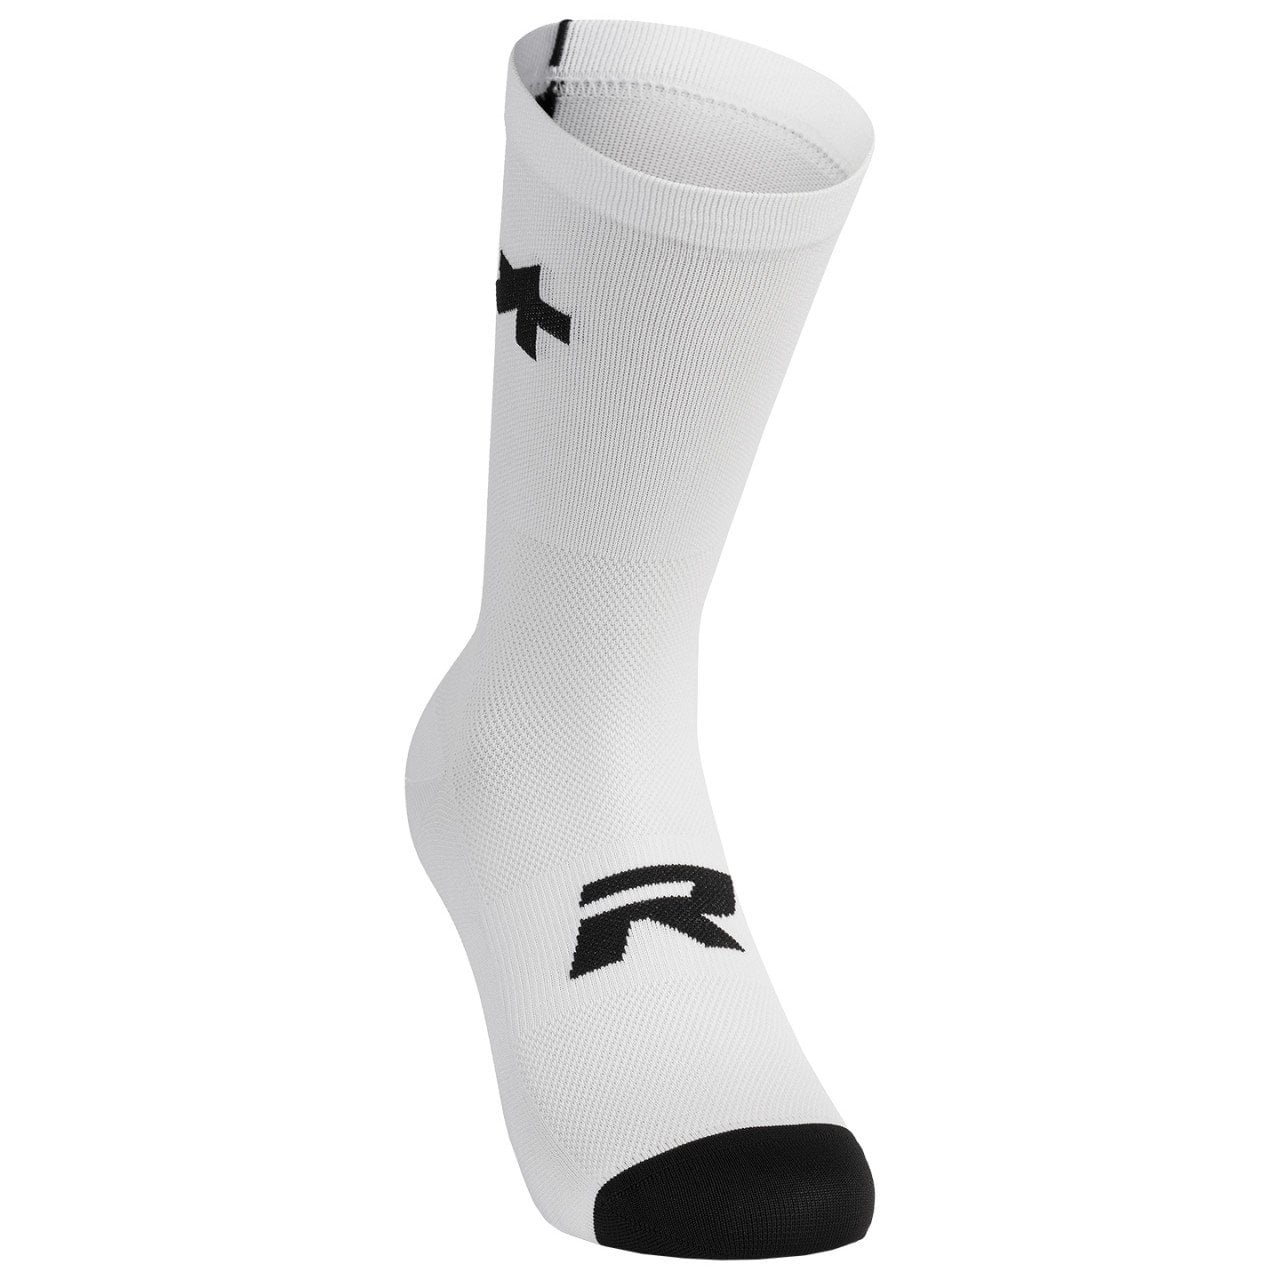 R S9 Cycling Socks (pack of 2)